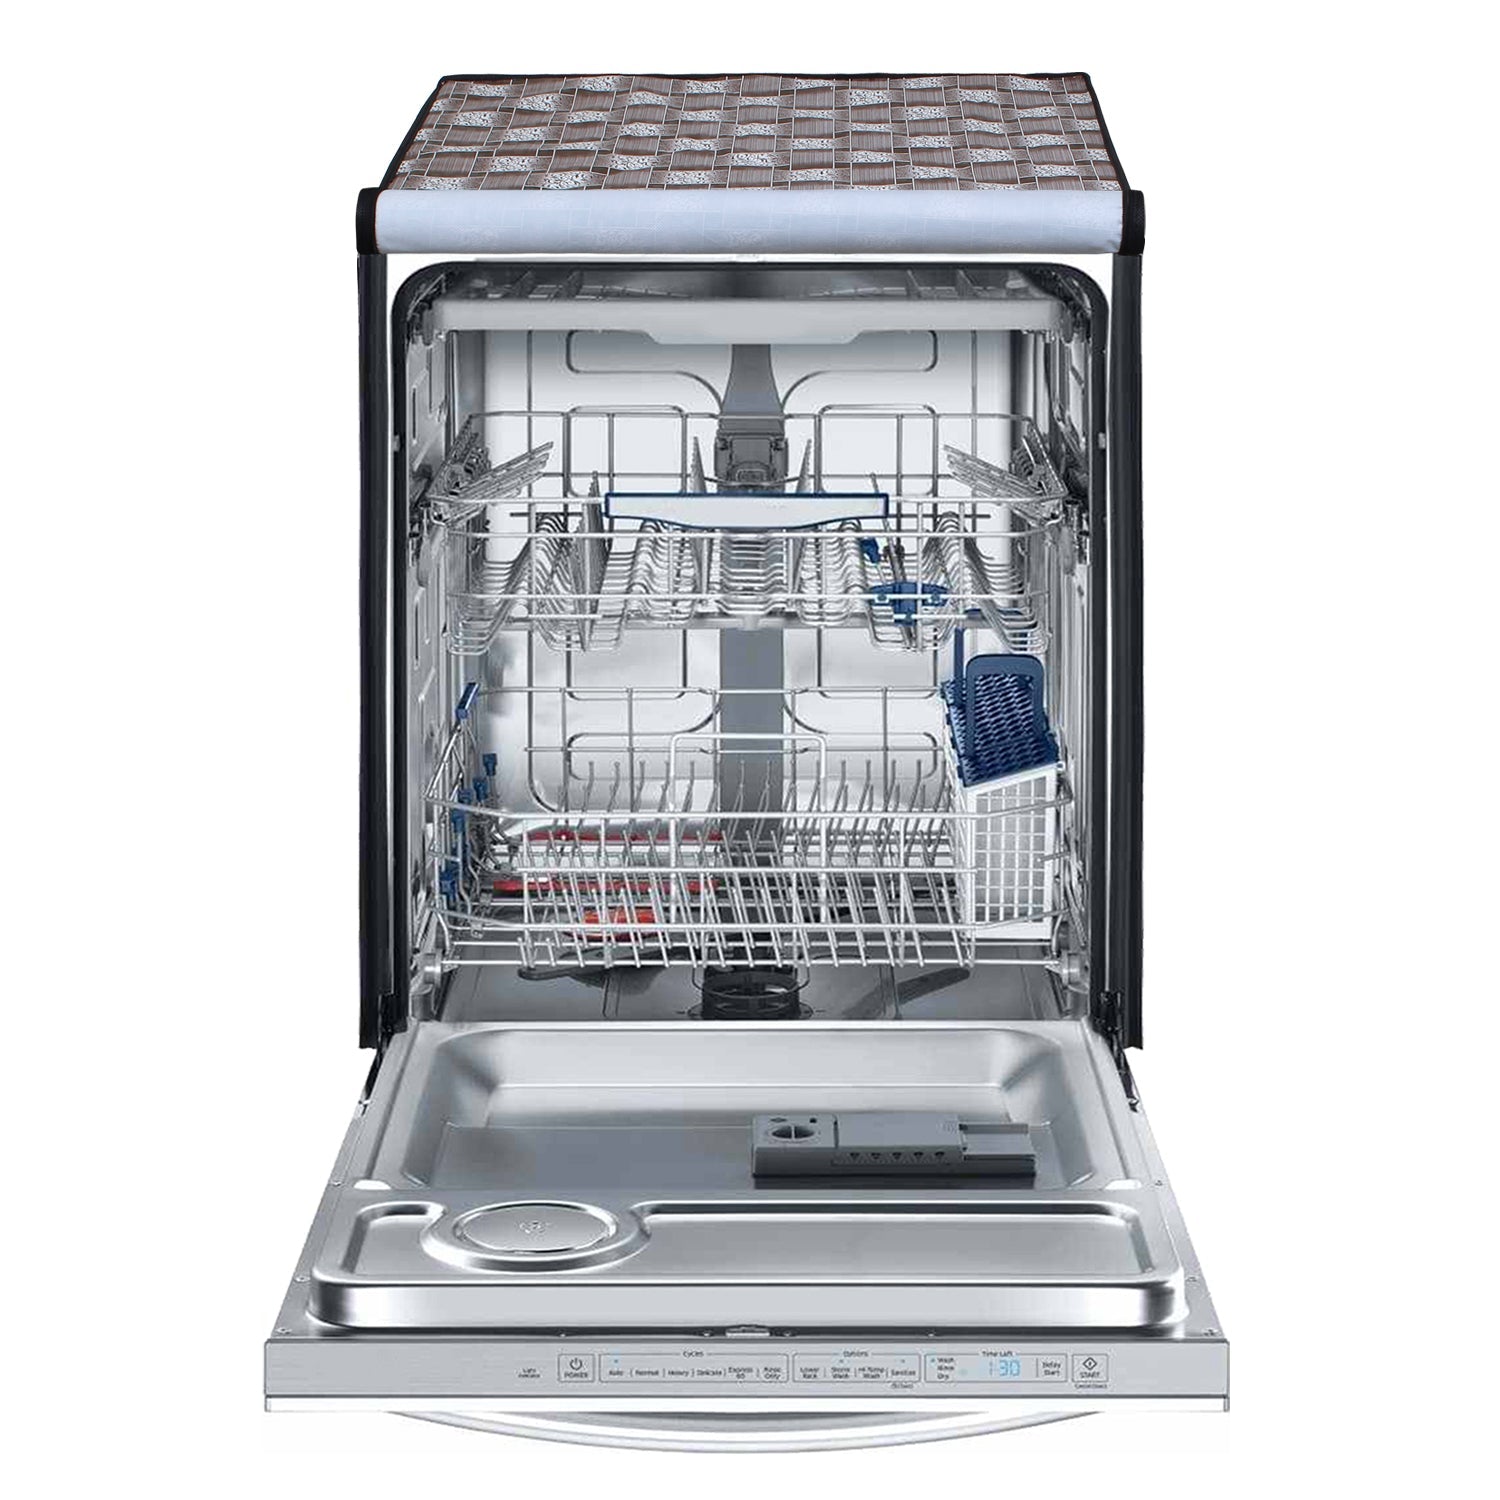 Waterproof and Dustproof Dishwasher Cover, SA41 - Dream Care Furnishings Private Limited